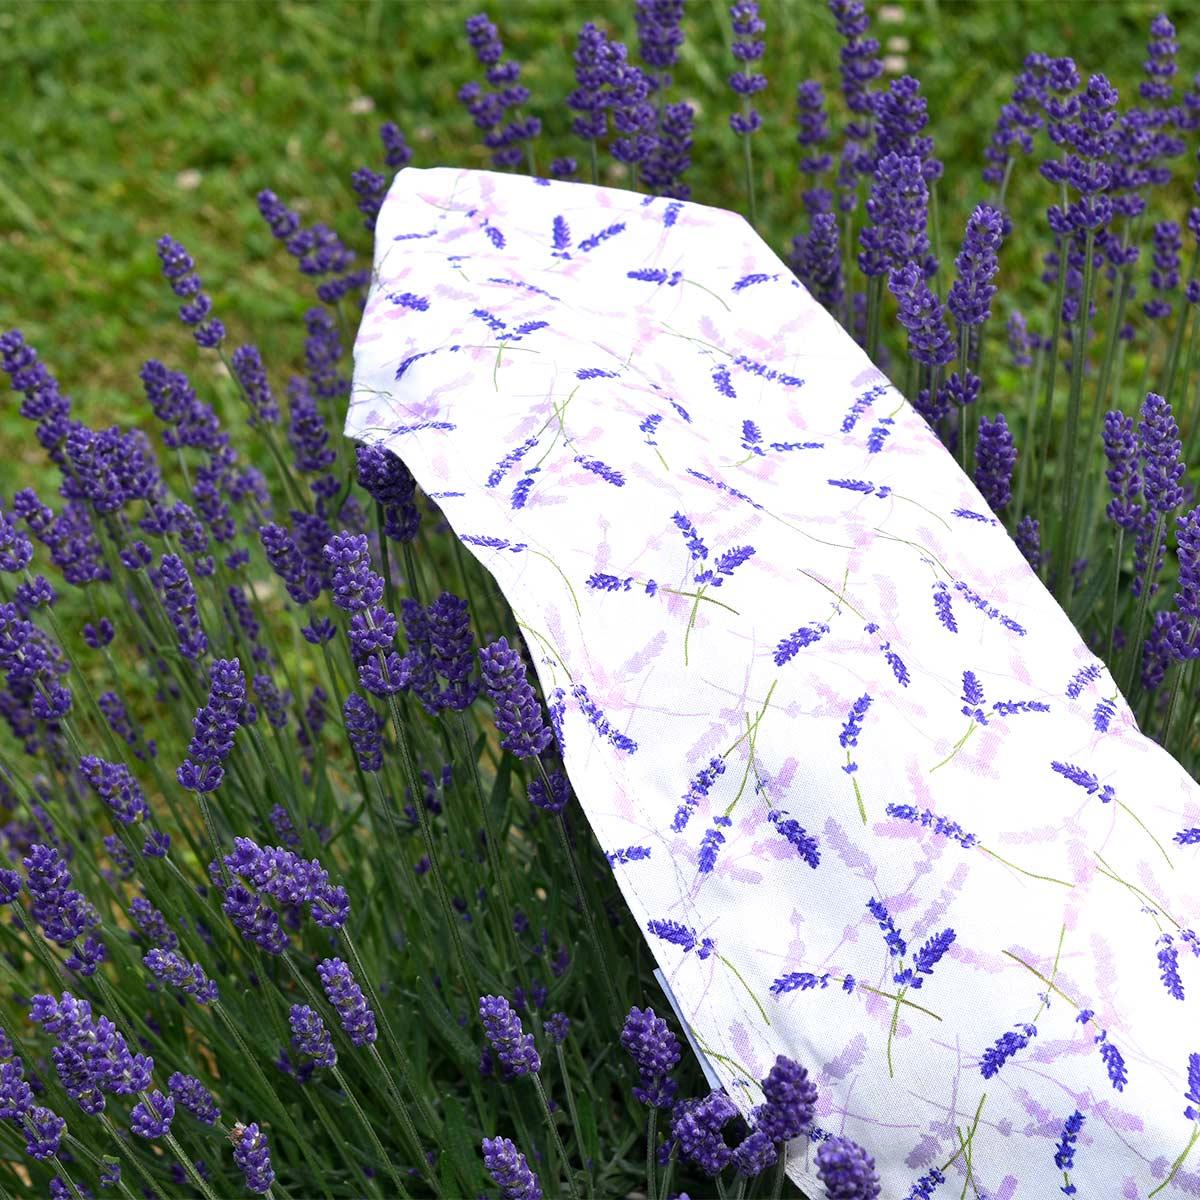 Relaxation Gifts for Women - Heated Lavender Neck Wrap